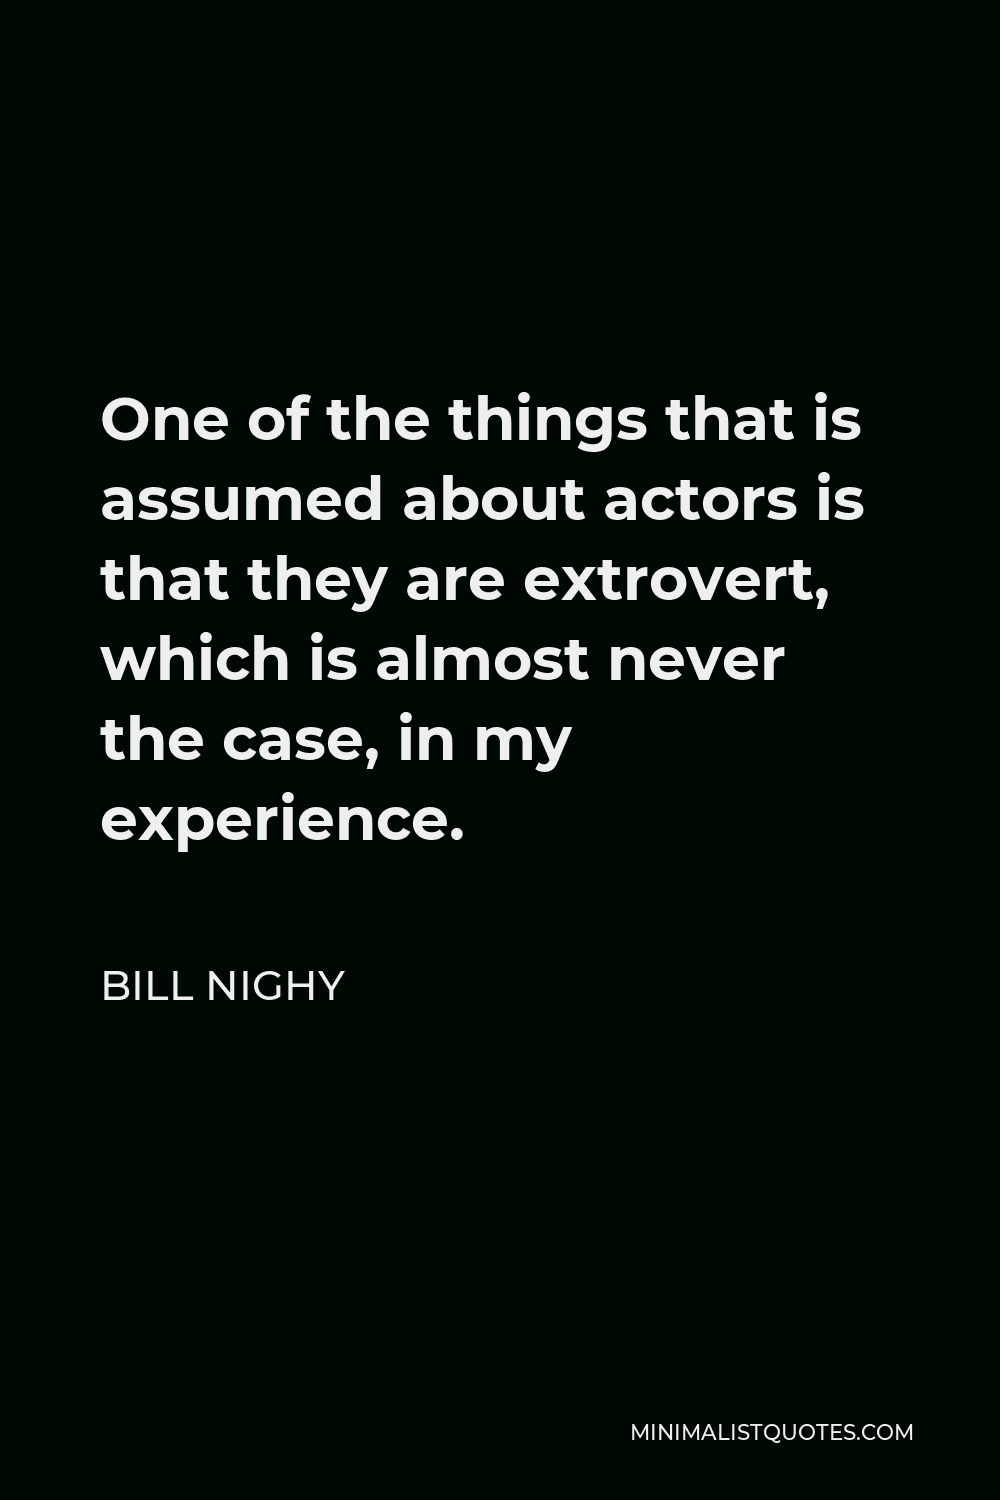 Bill Nighy Quote - One of the things that is assumed about actors is that they are extrovert, which is almost never the case, in my experience.